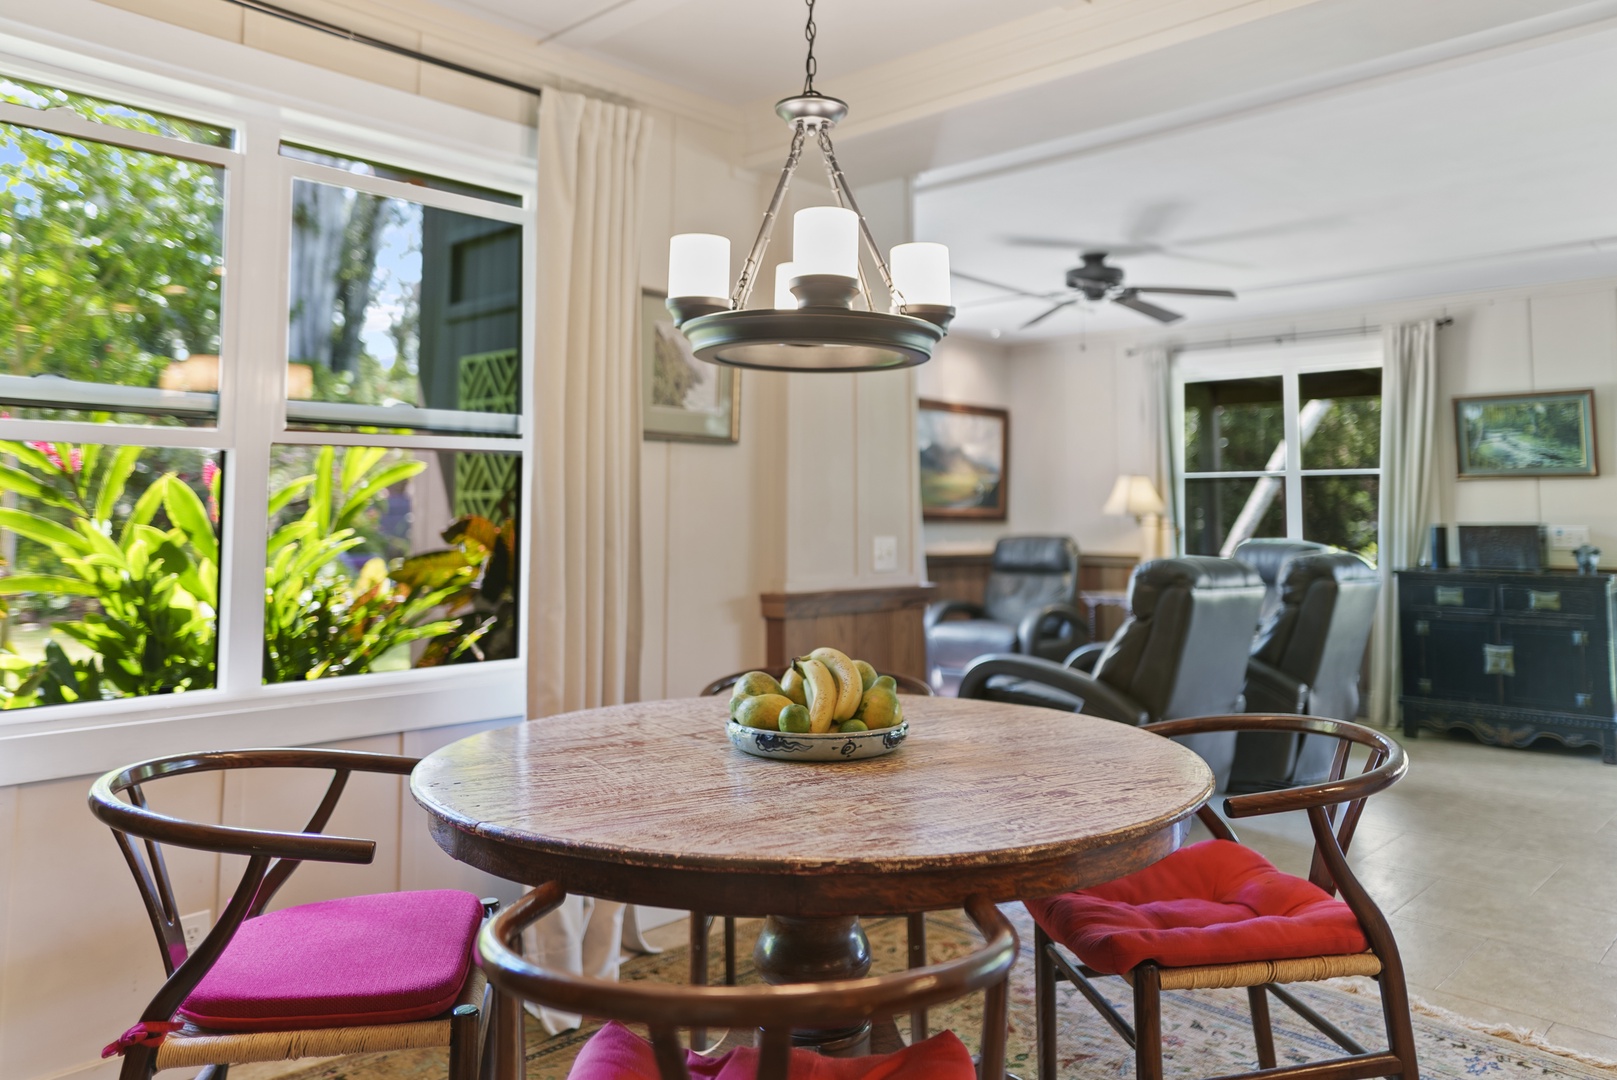 Haleiwa Vacation Rentals, Hale Anahulu - Dining area opens to living room and has views of the lush, tropical garden